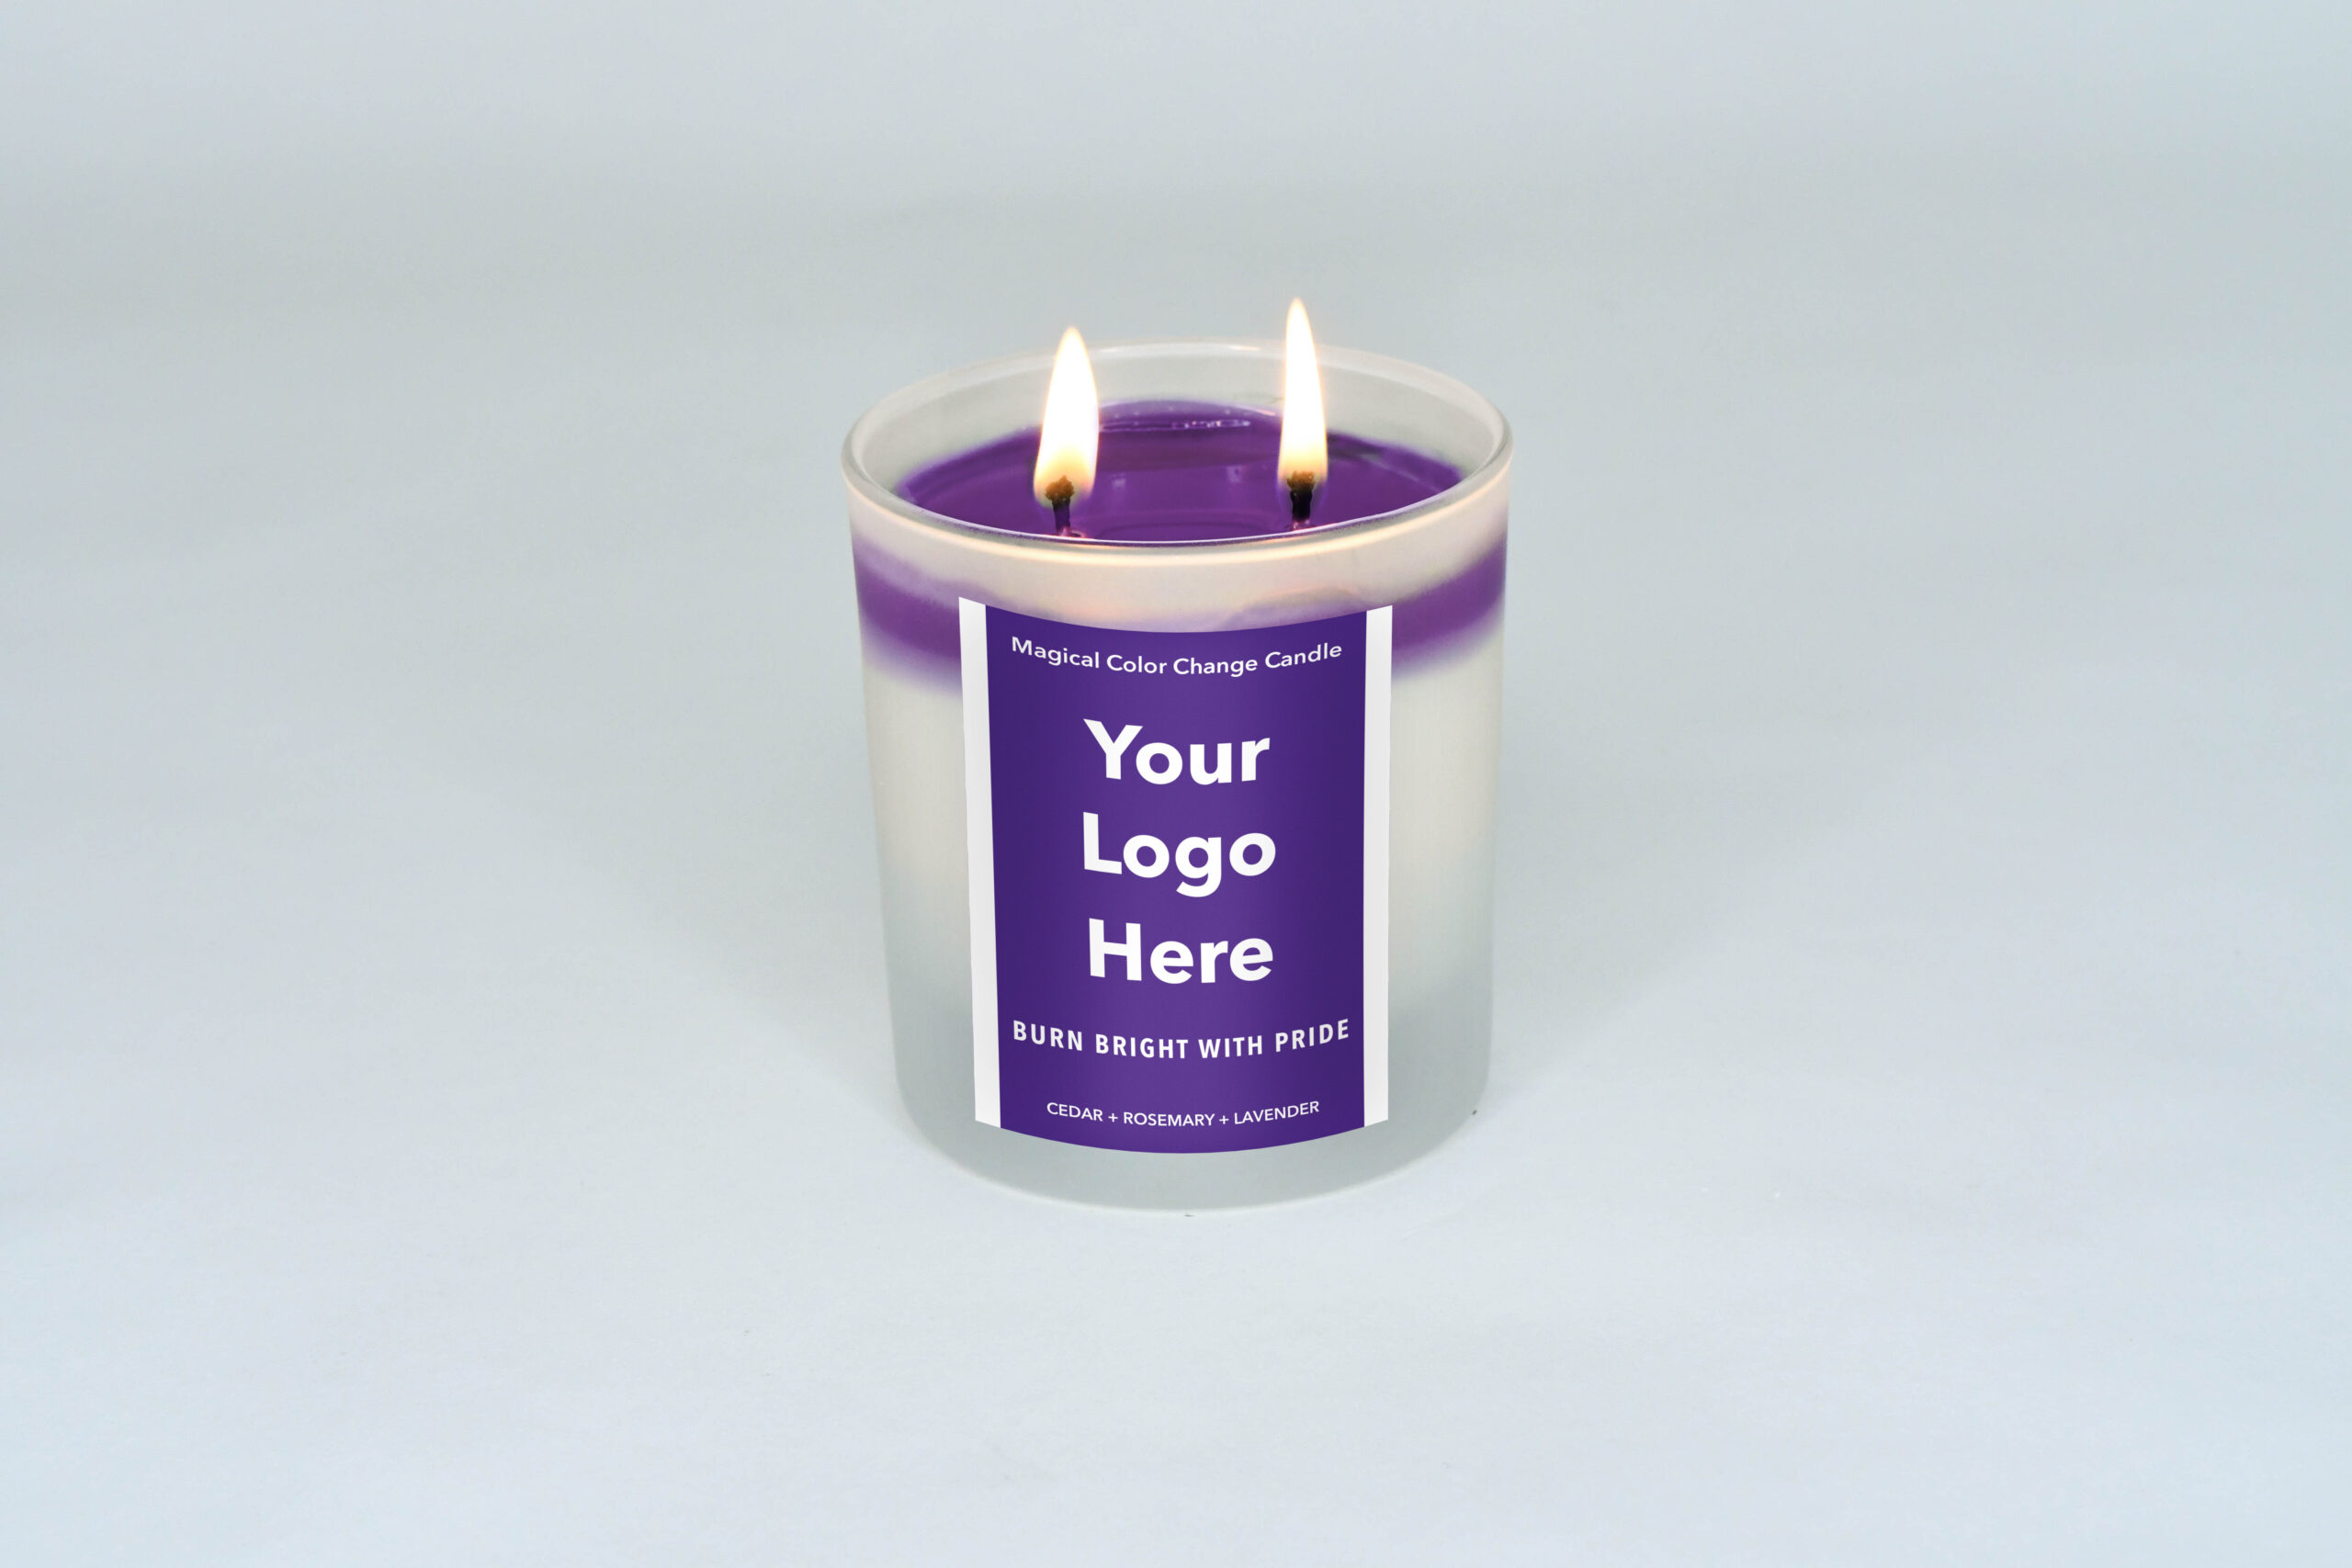 Purple candle, your logo here, lit, full wax pool